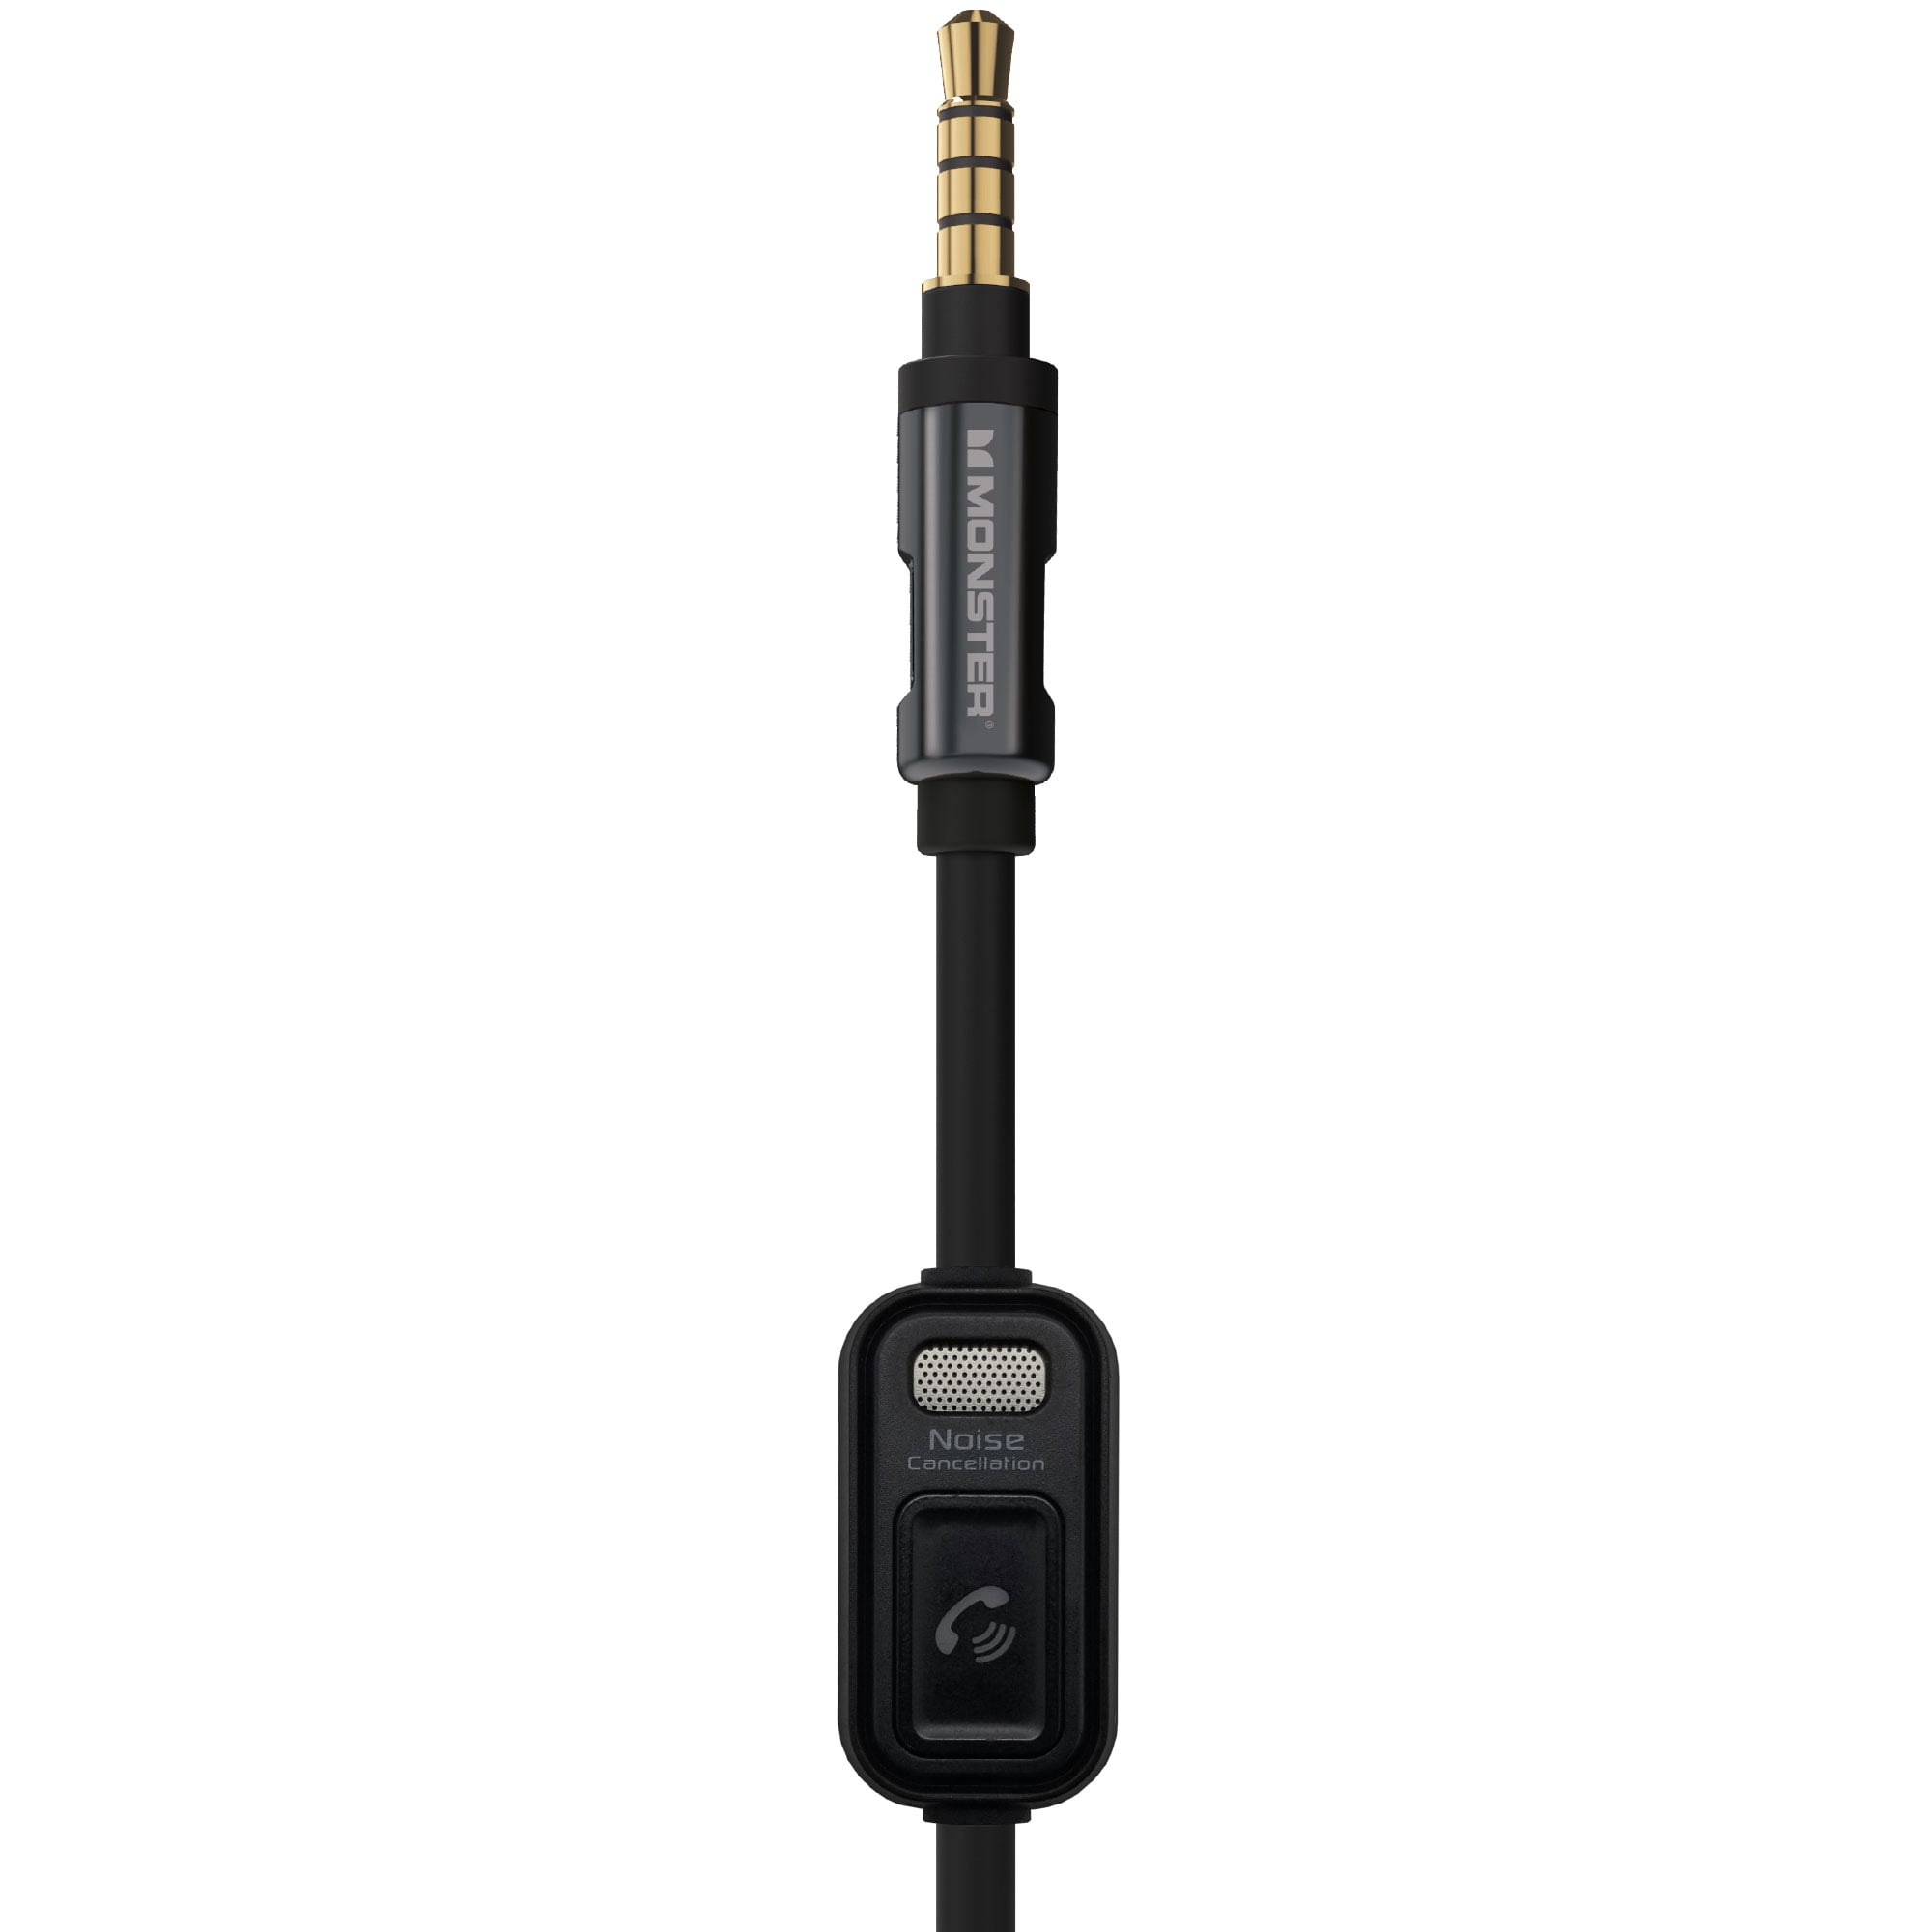 Monster Auxiliary Audio Cable with Hands-Free Microphone, 3 ft